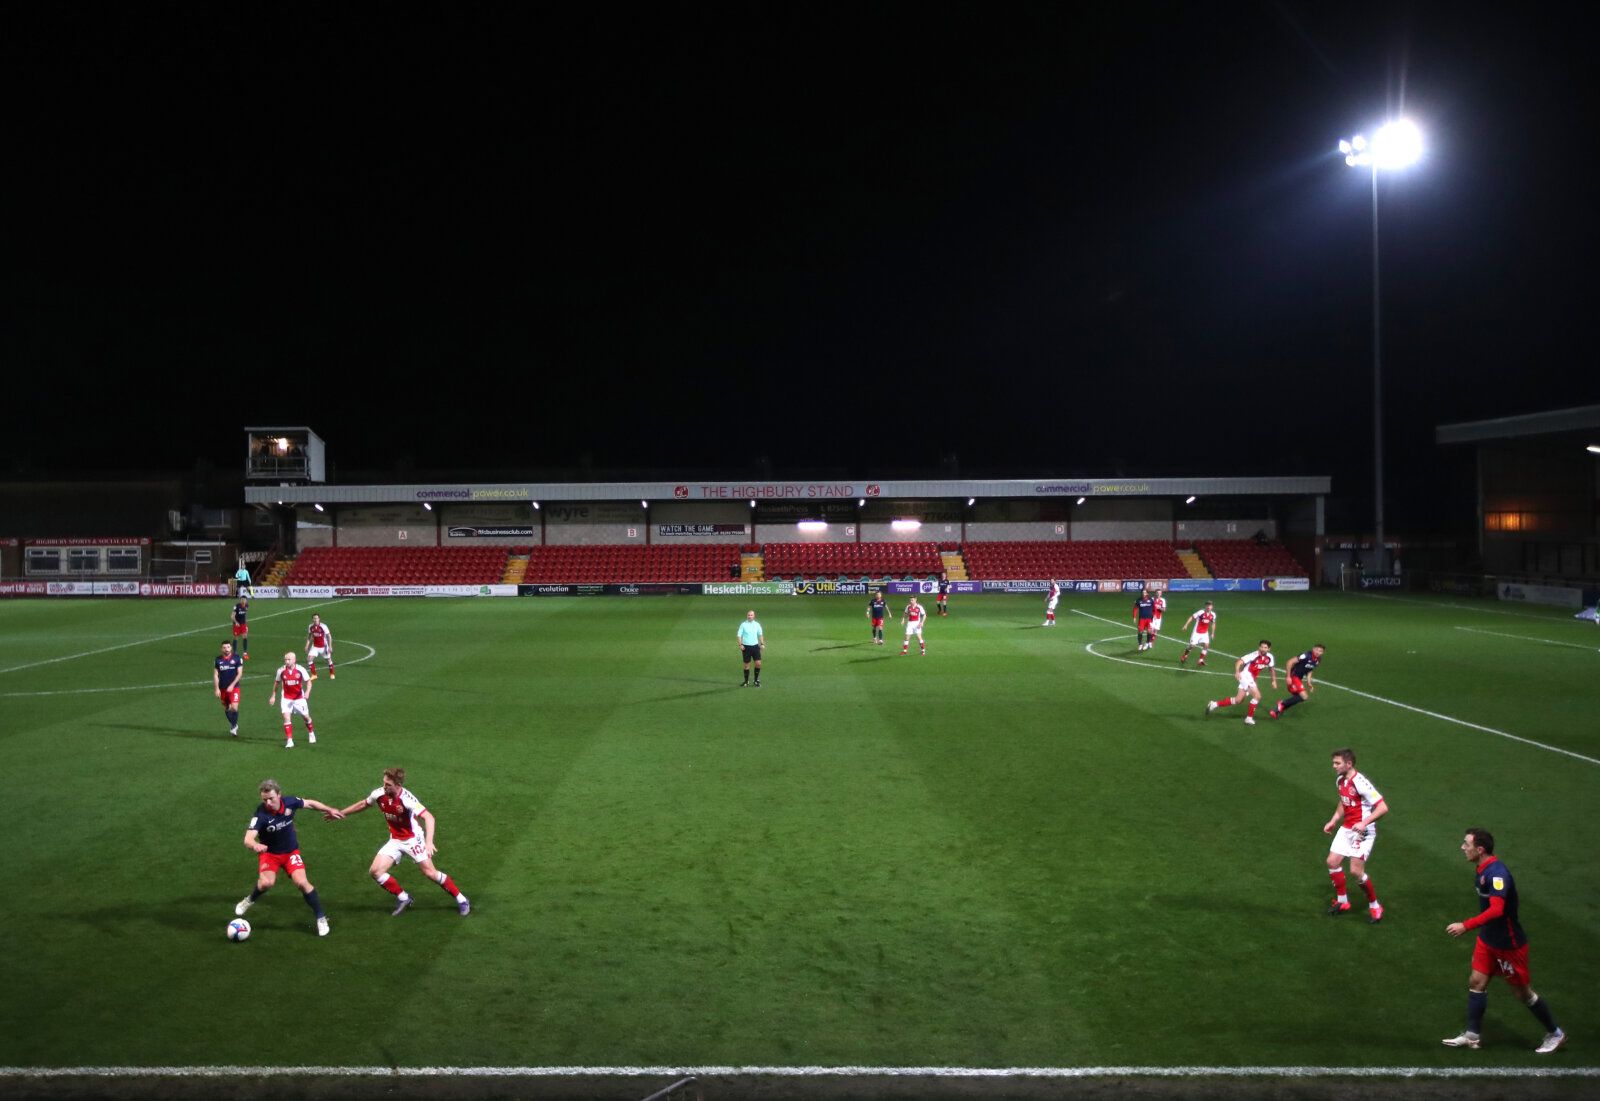 Soccer Football - League One - Fleetwood Town v Sunderland - Highbury Stadium, Fleetwood, Britain - November 27, 2020 General view of the action Action Images/Molly Darlington EDITORIAL USE ONLY. No use with unauthorized audio, video, data, fixture lists, club/league logos or 'live' services. Online in-match use limited to 75 images, no video emulation. No use in betting, games or single club /league/player publications.  Please contact your account representative for further details.